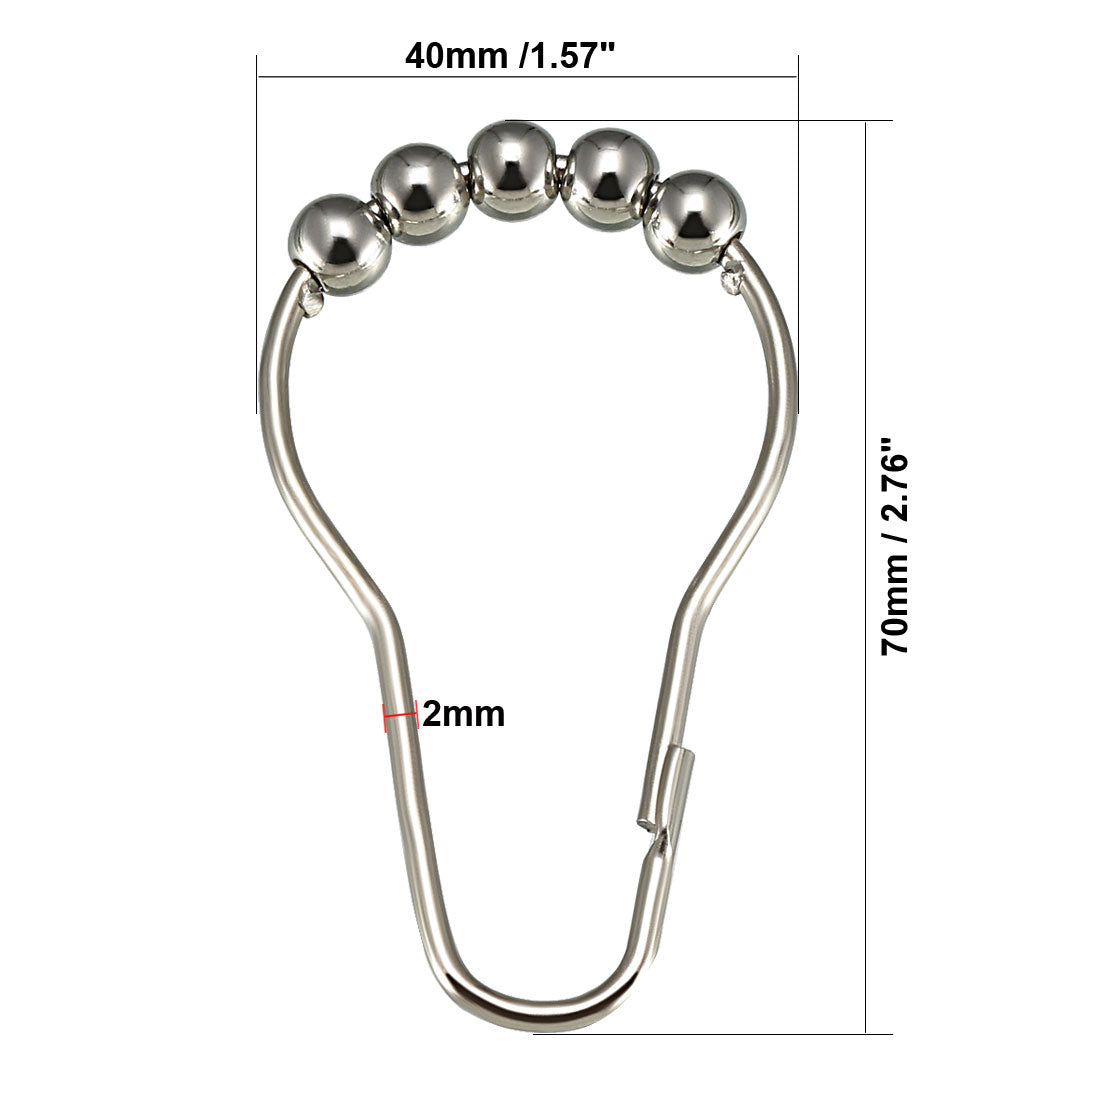 uxcell Uxcell Shower Curtain Ring Hooks Metal for Bathroom Shower Rods Curtains Liners Iron Ball 10 Pcs